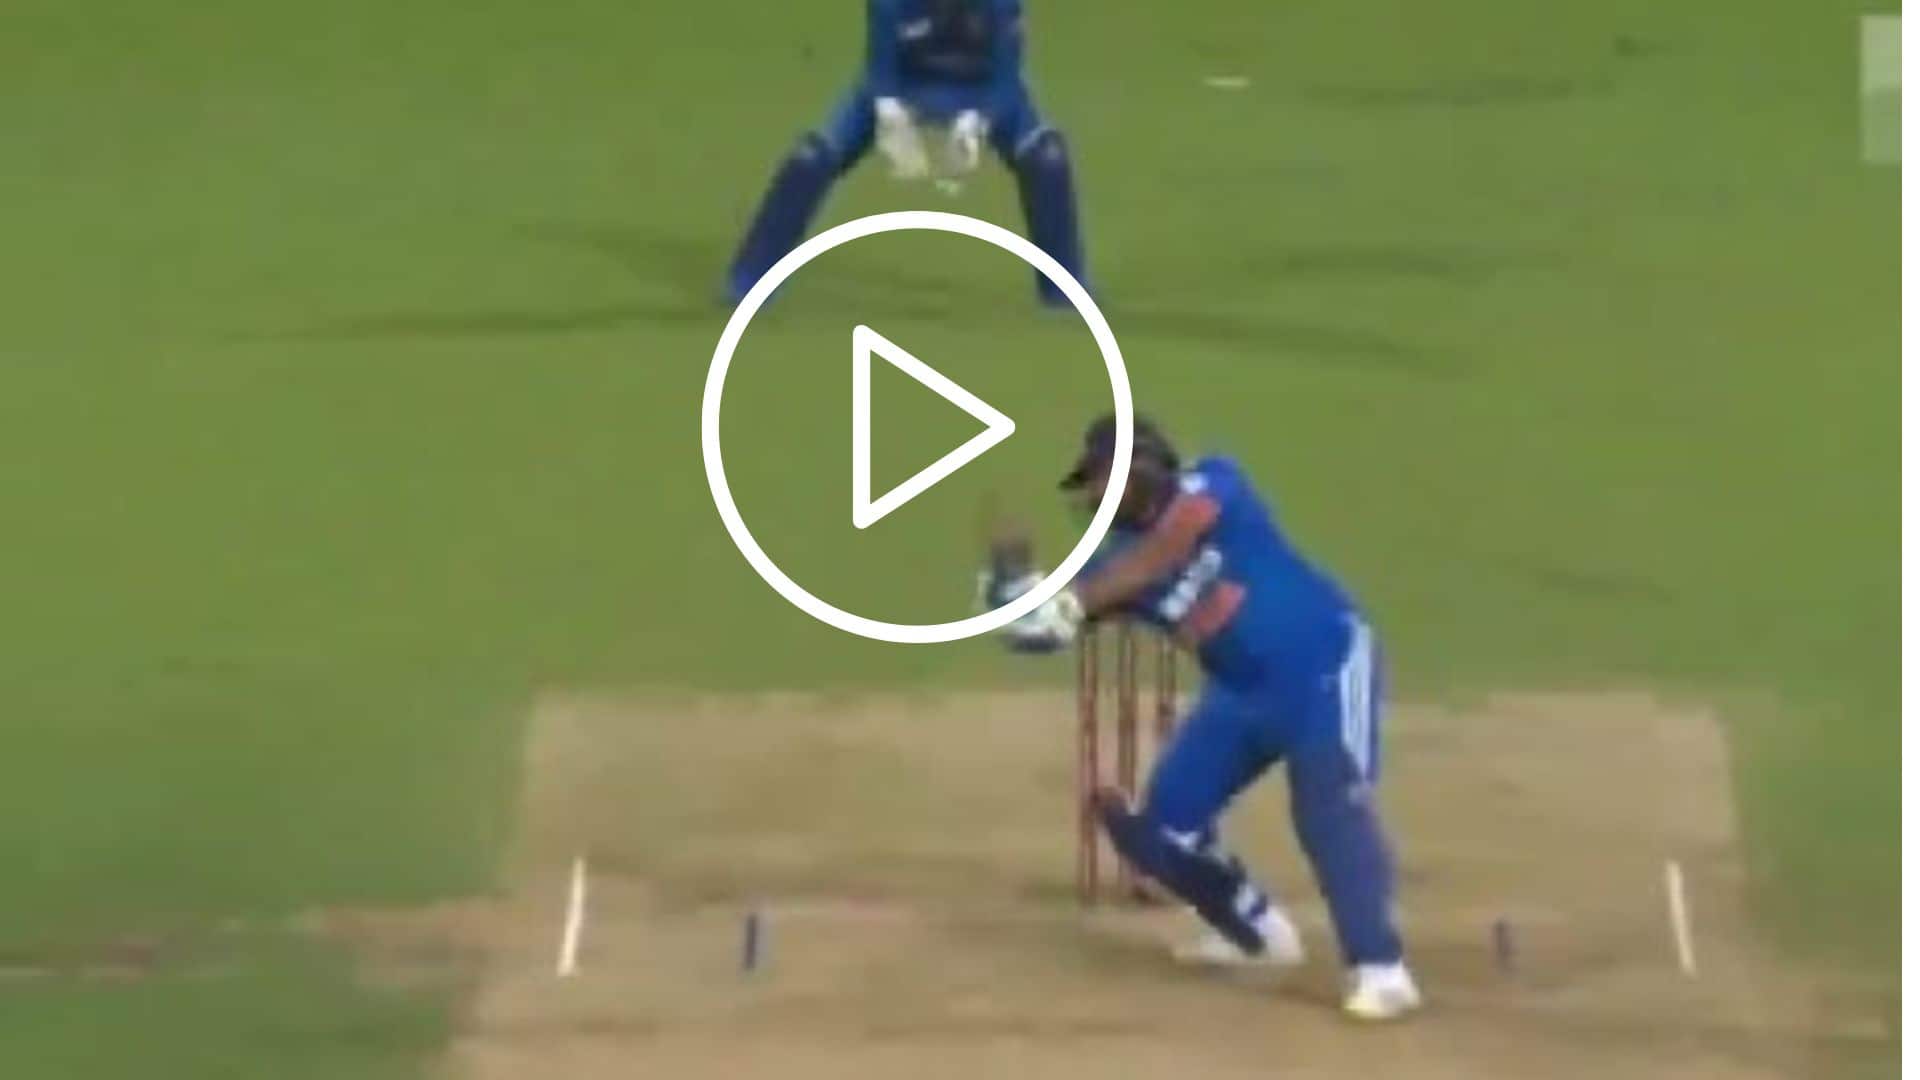 [Watch] Rohit Sharma Gets To His 'Record-Breaking' 5th T20I Century With A Powerful Boundary